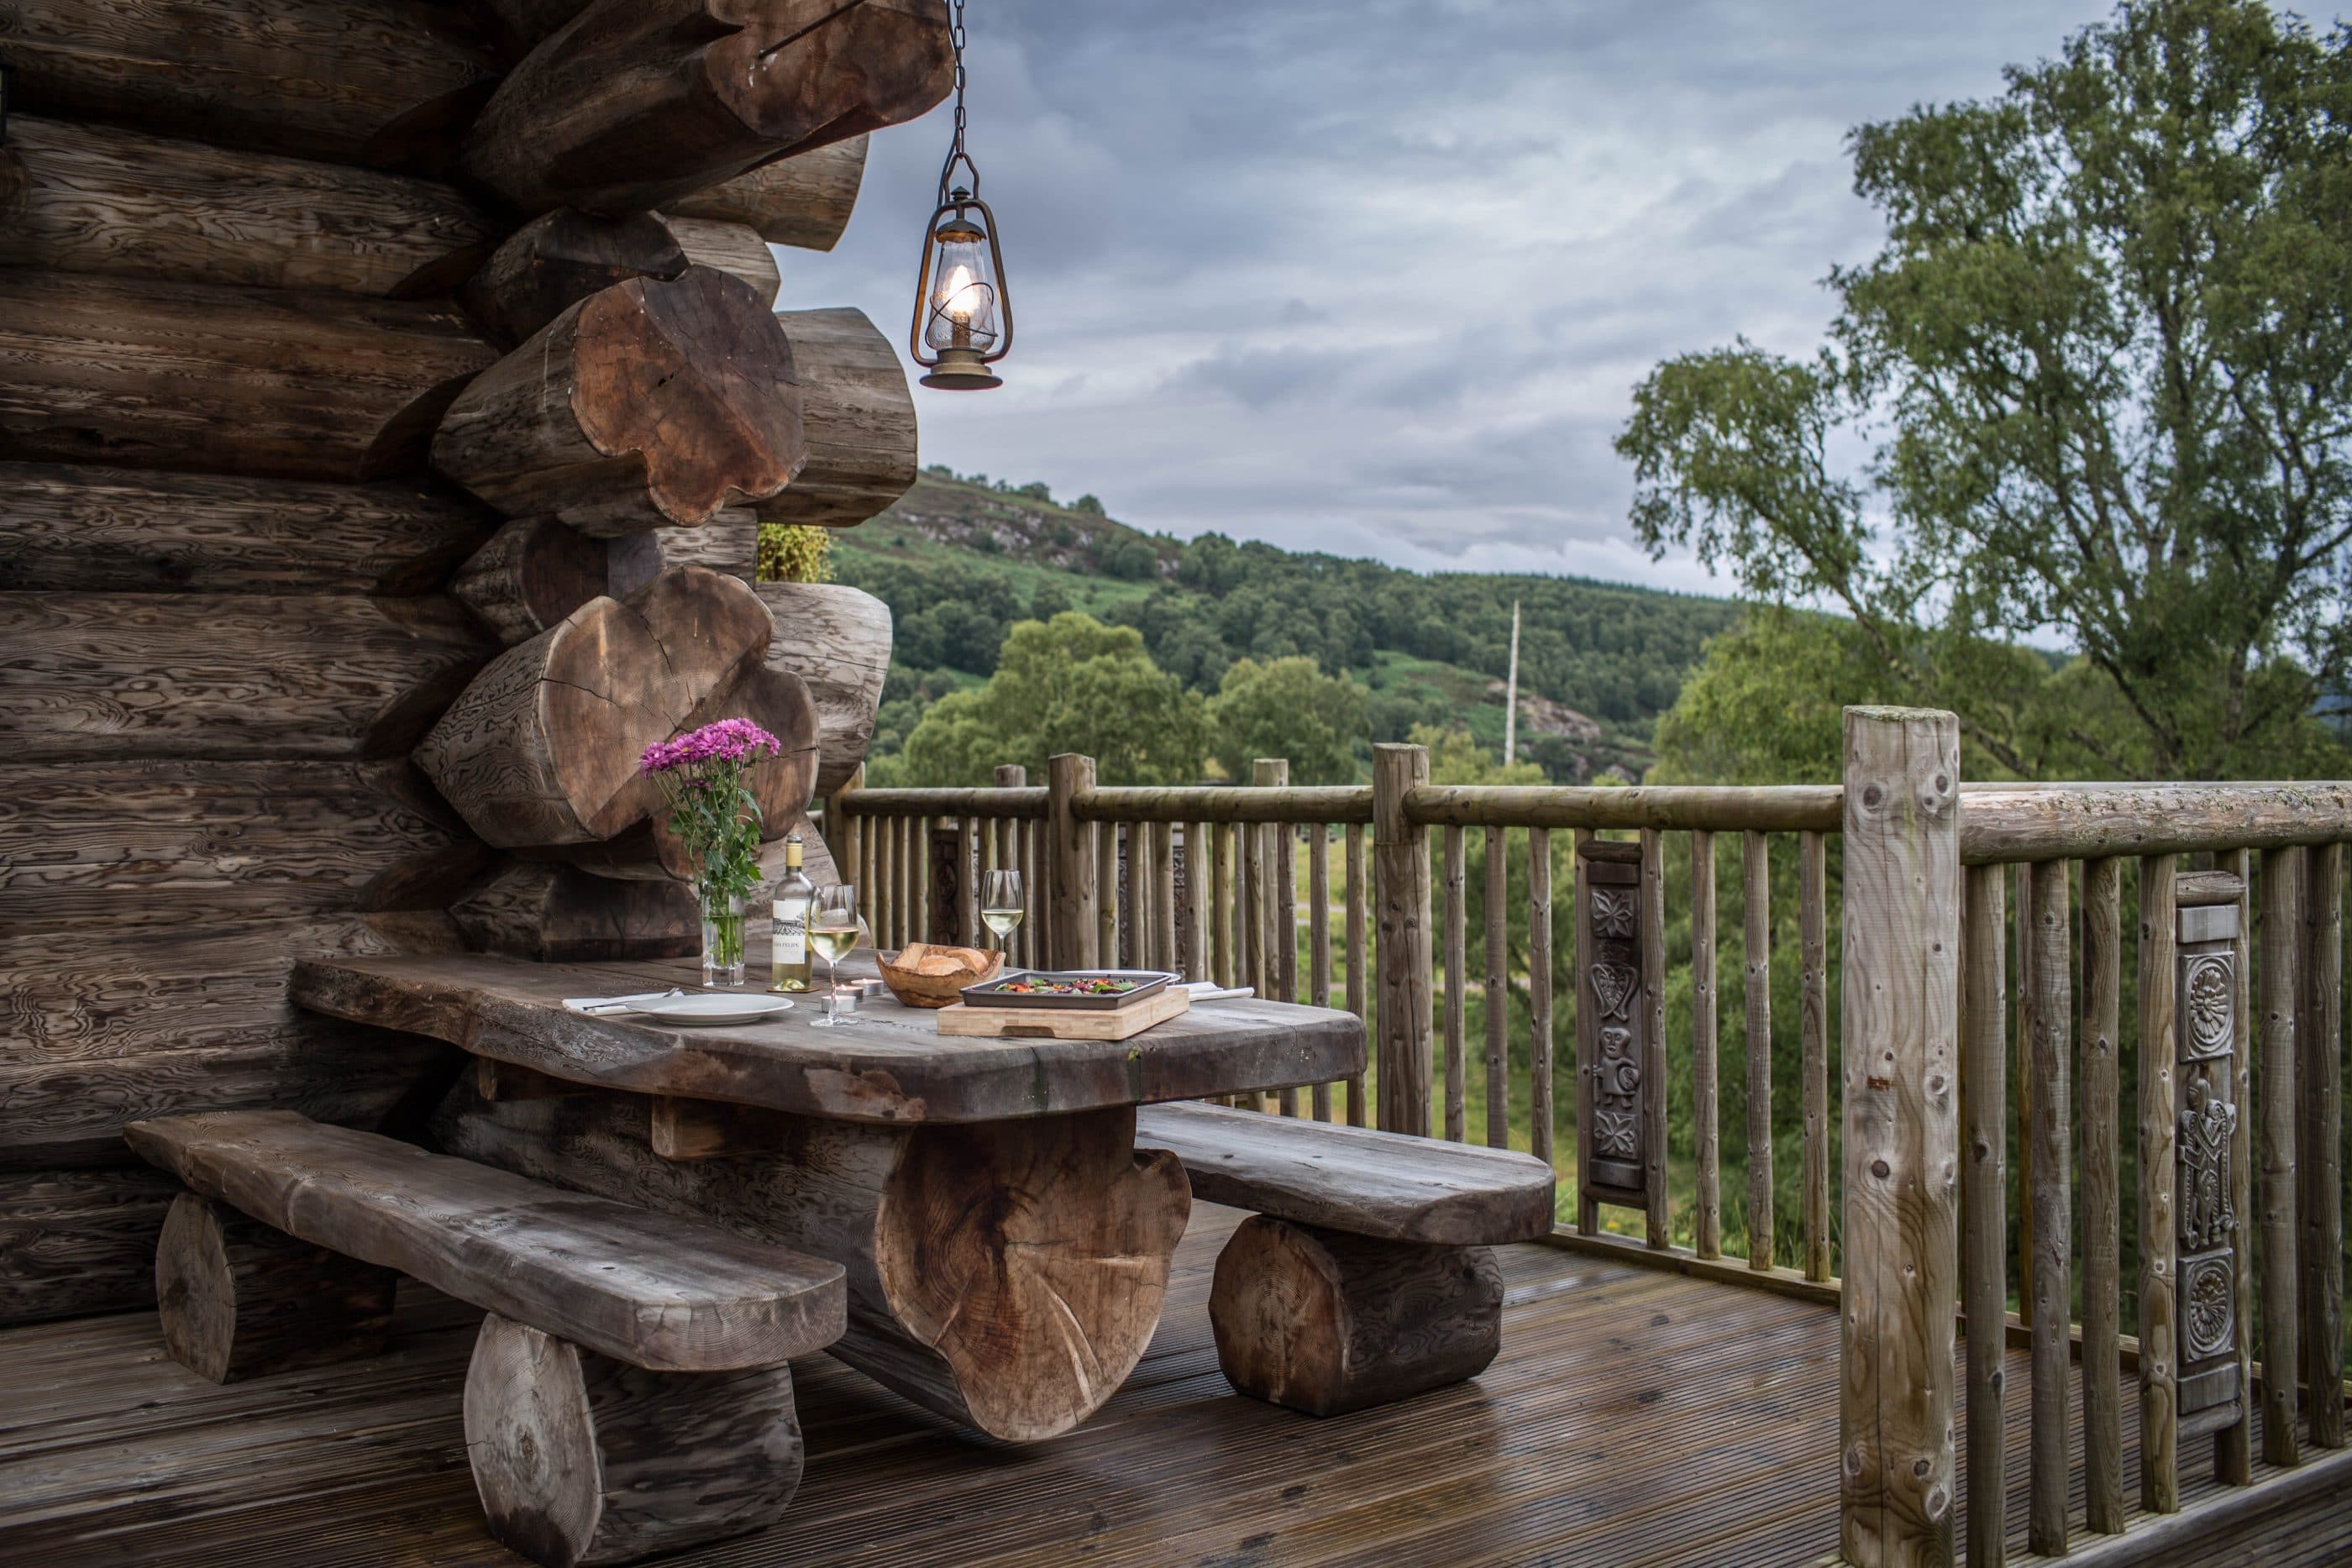 Outdoor seating area of luxury log cabin